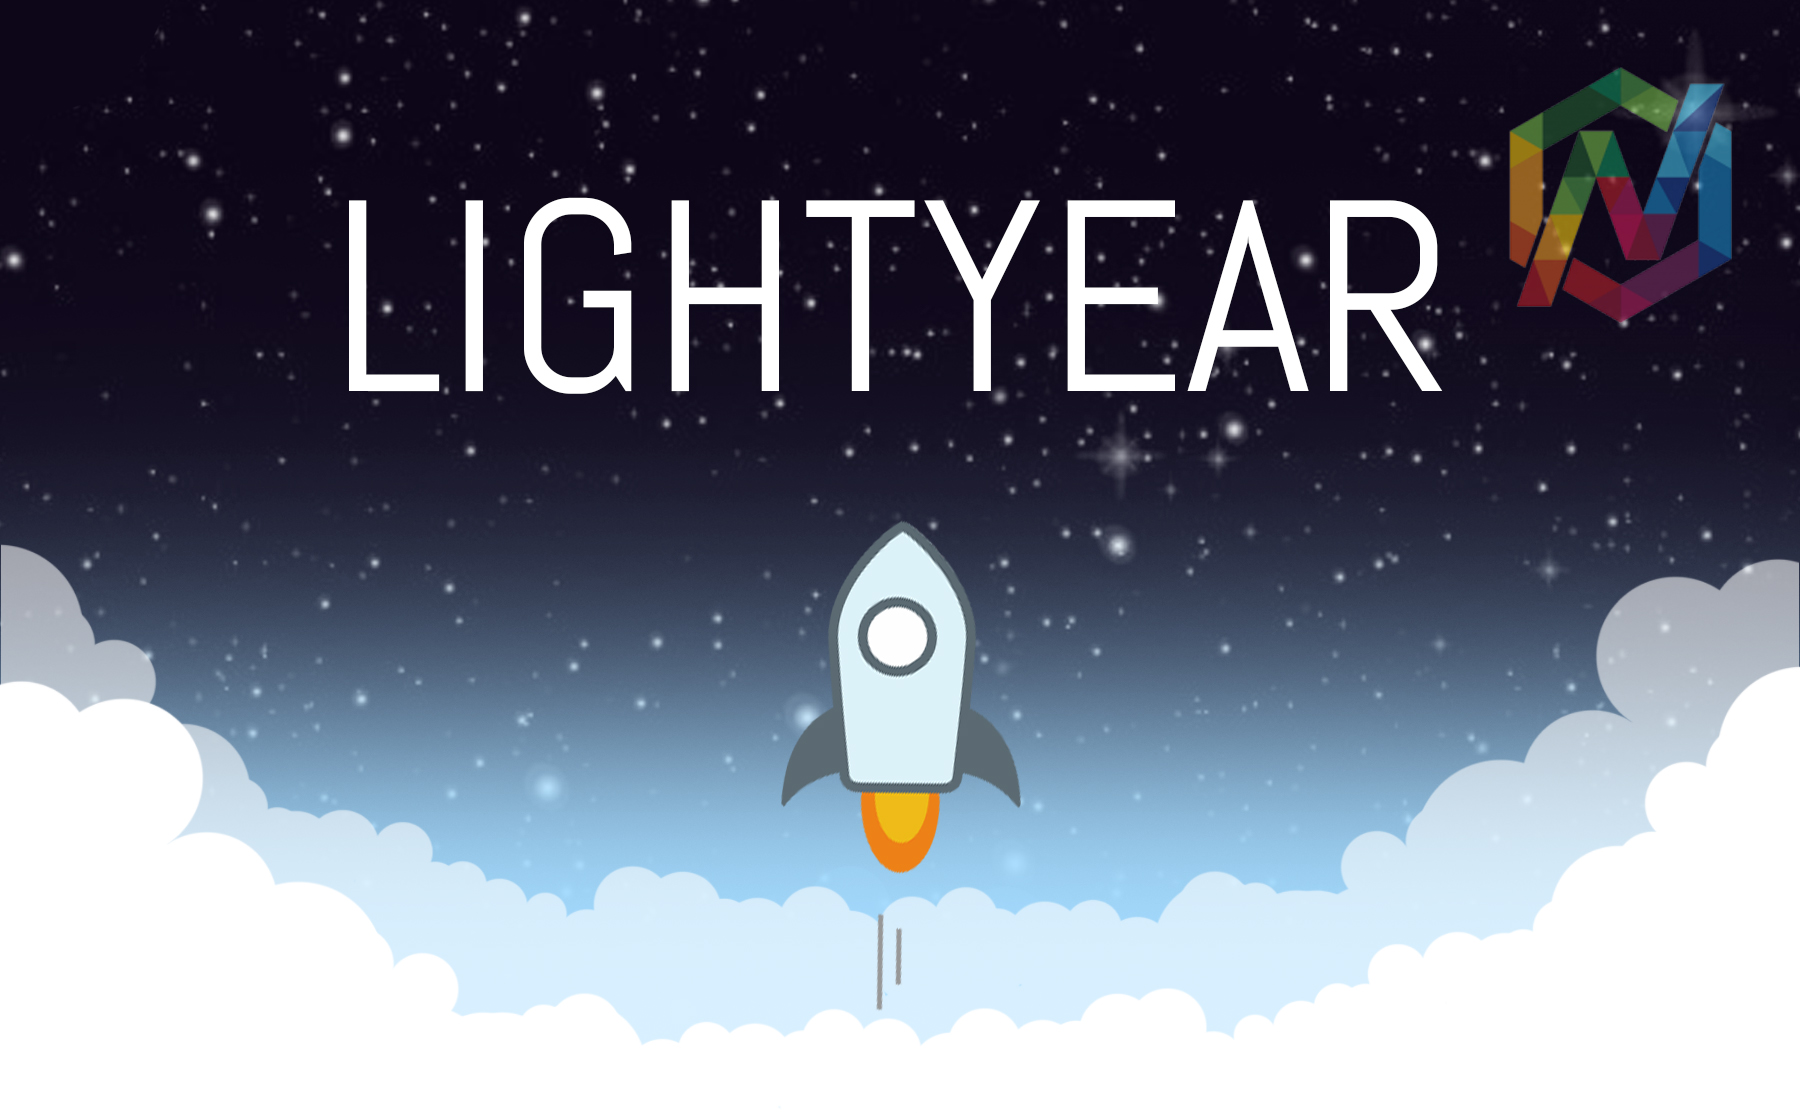 Creator of Stellar launches Lightyear.io to build universal payments network on Blockchain